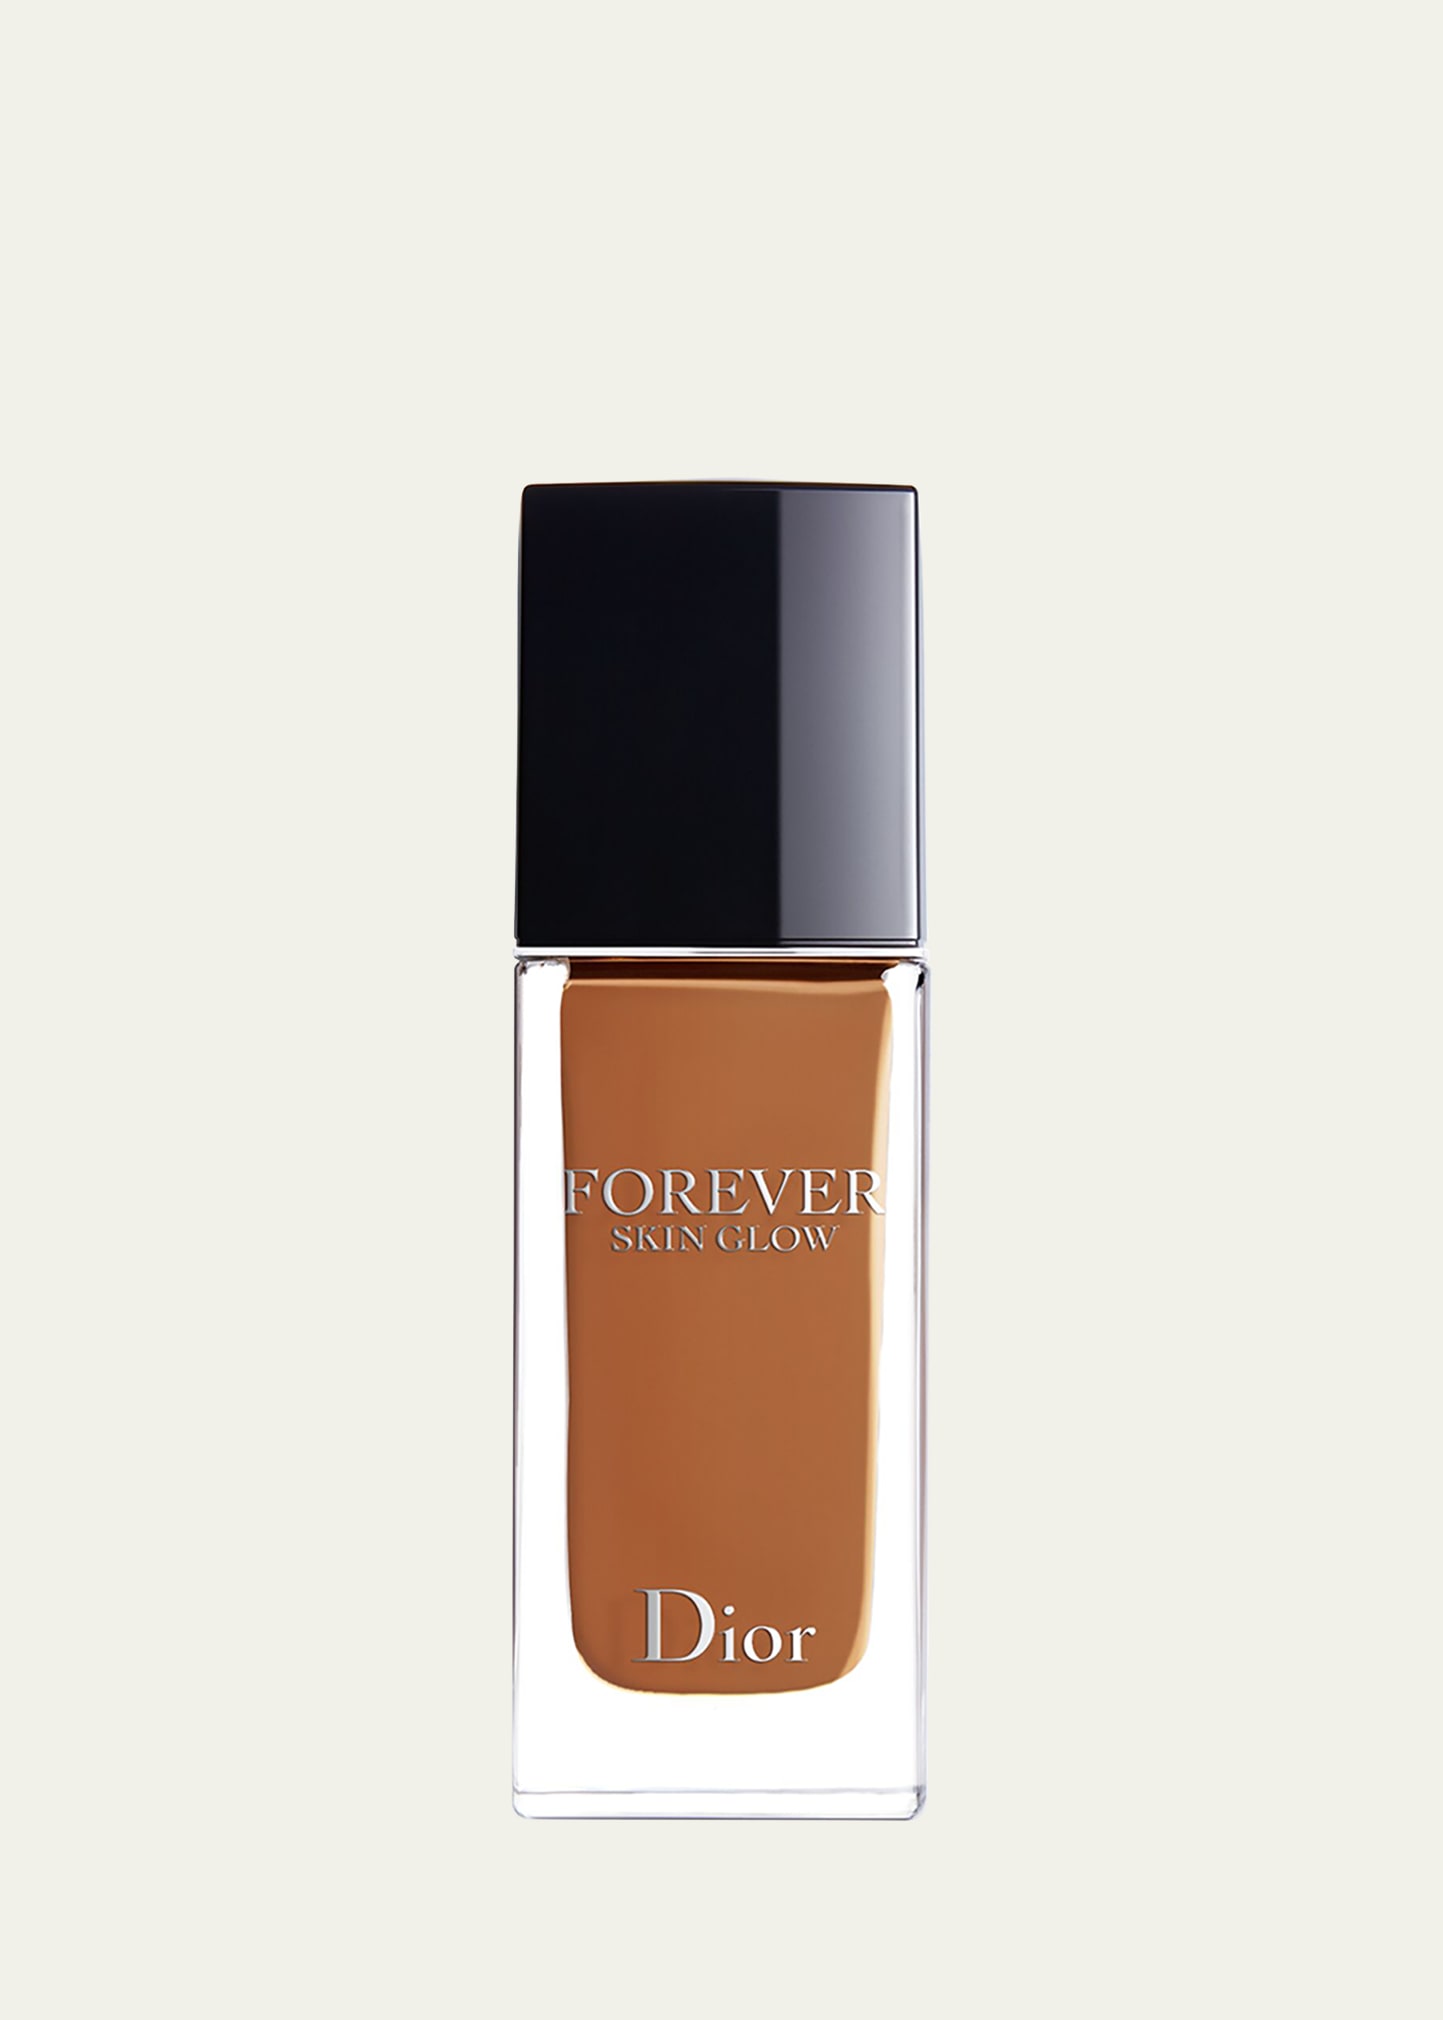 Dior 1 Oz.  Forever Skin Glow Hydrating Foundation Spf 15 In 6 Neutral